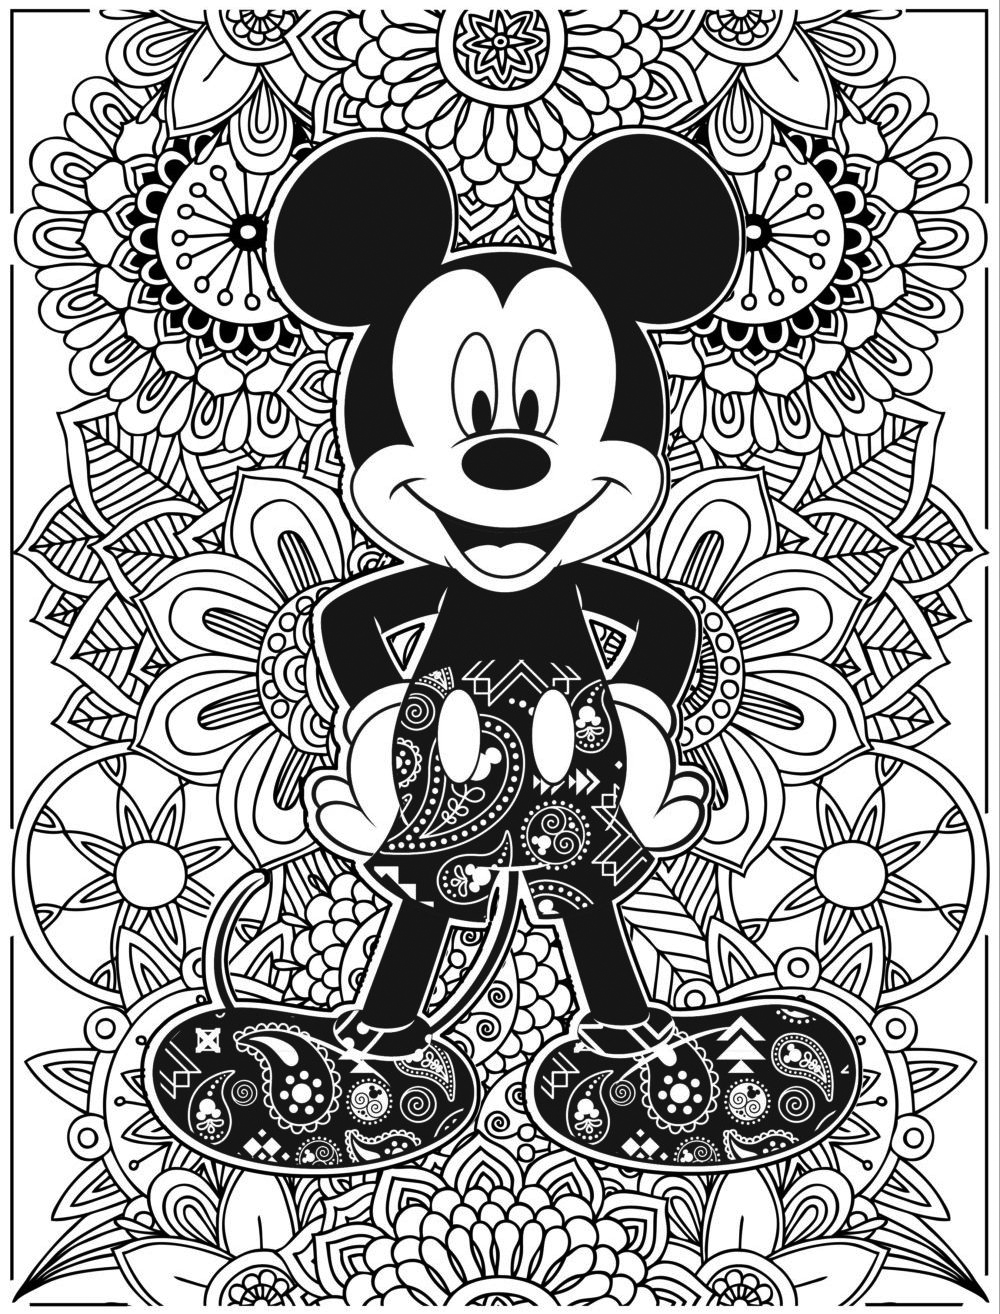 19 Printable Disney Coloring Sheets So You Can FINALLY Have a Few